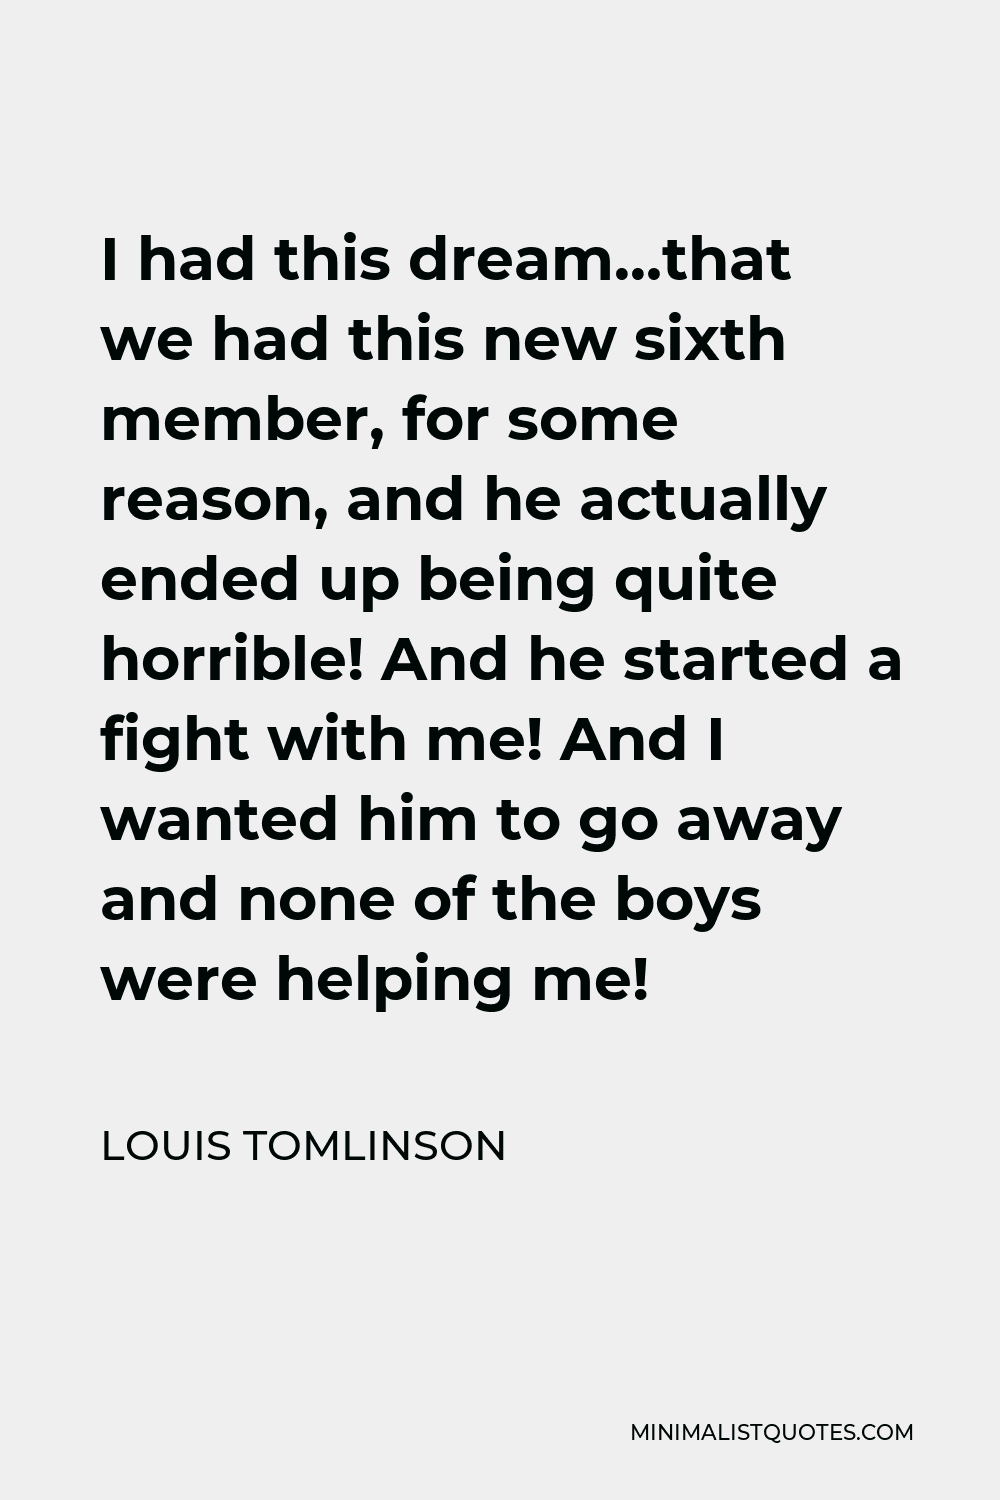 Louis Tomlinson Quote: I had this dream...that we had this new sixth  member, for some reason, and he actually ended up being quite horrible! And  he started a fight with me! And